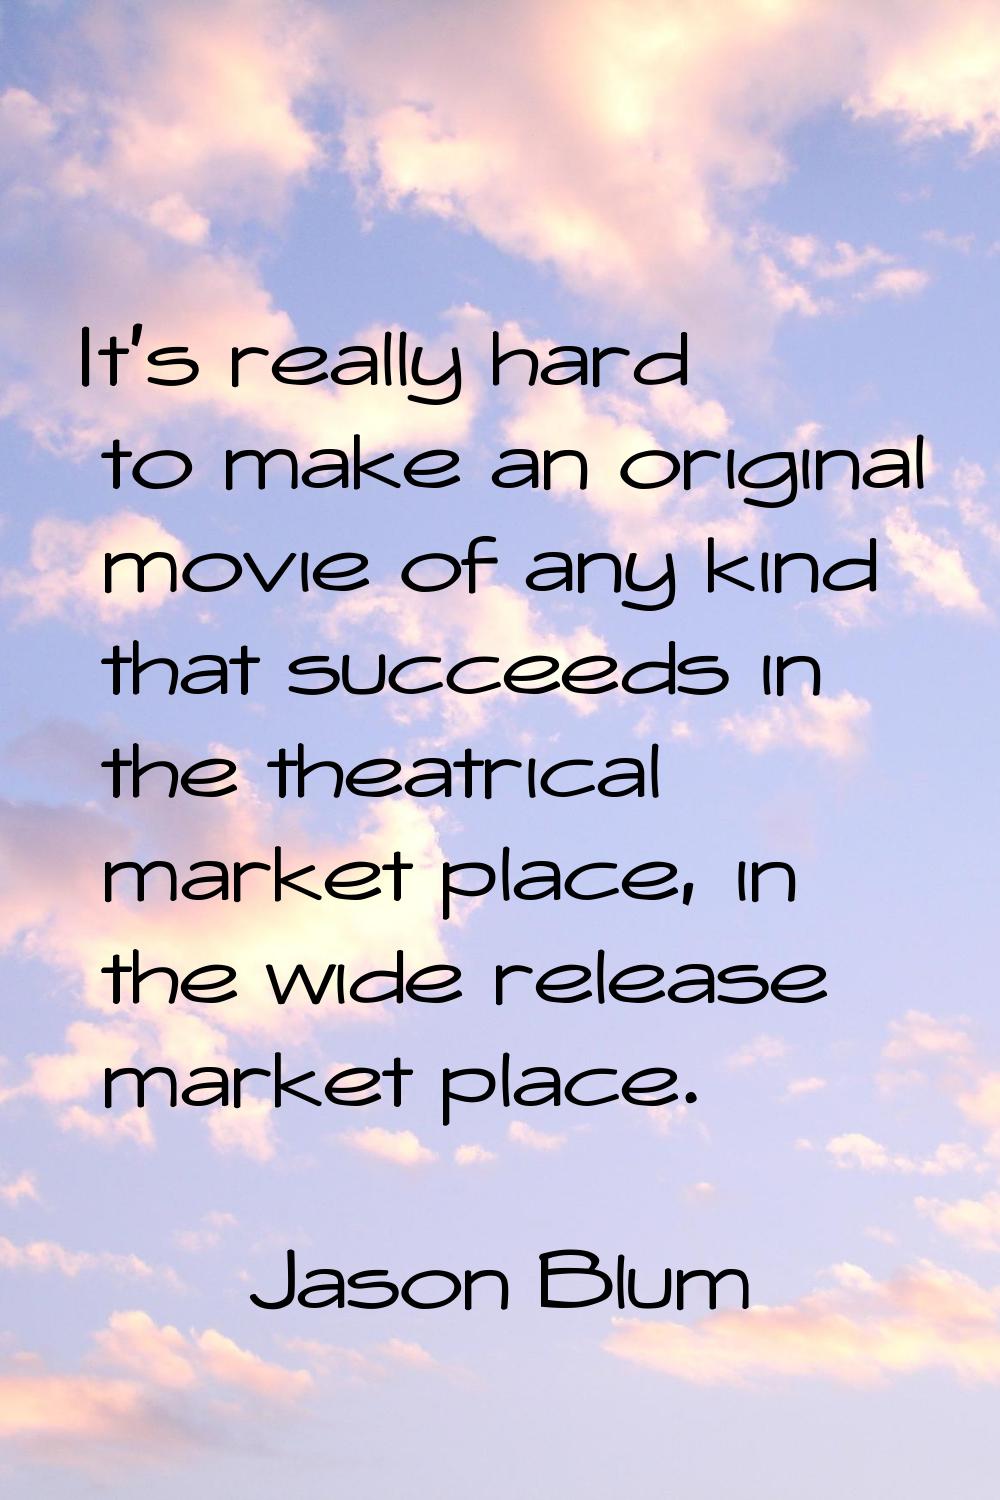 It's really hard to make an original movie of any kind that succeeds in the theatrical market place